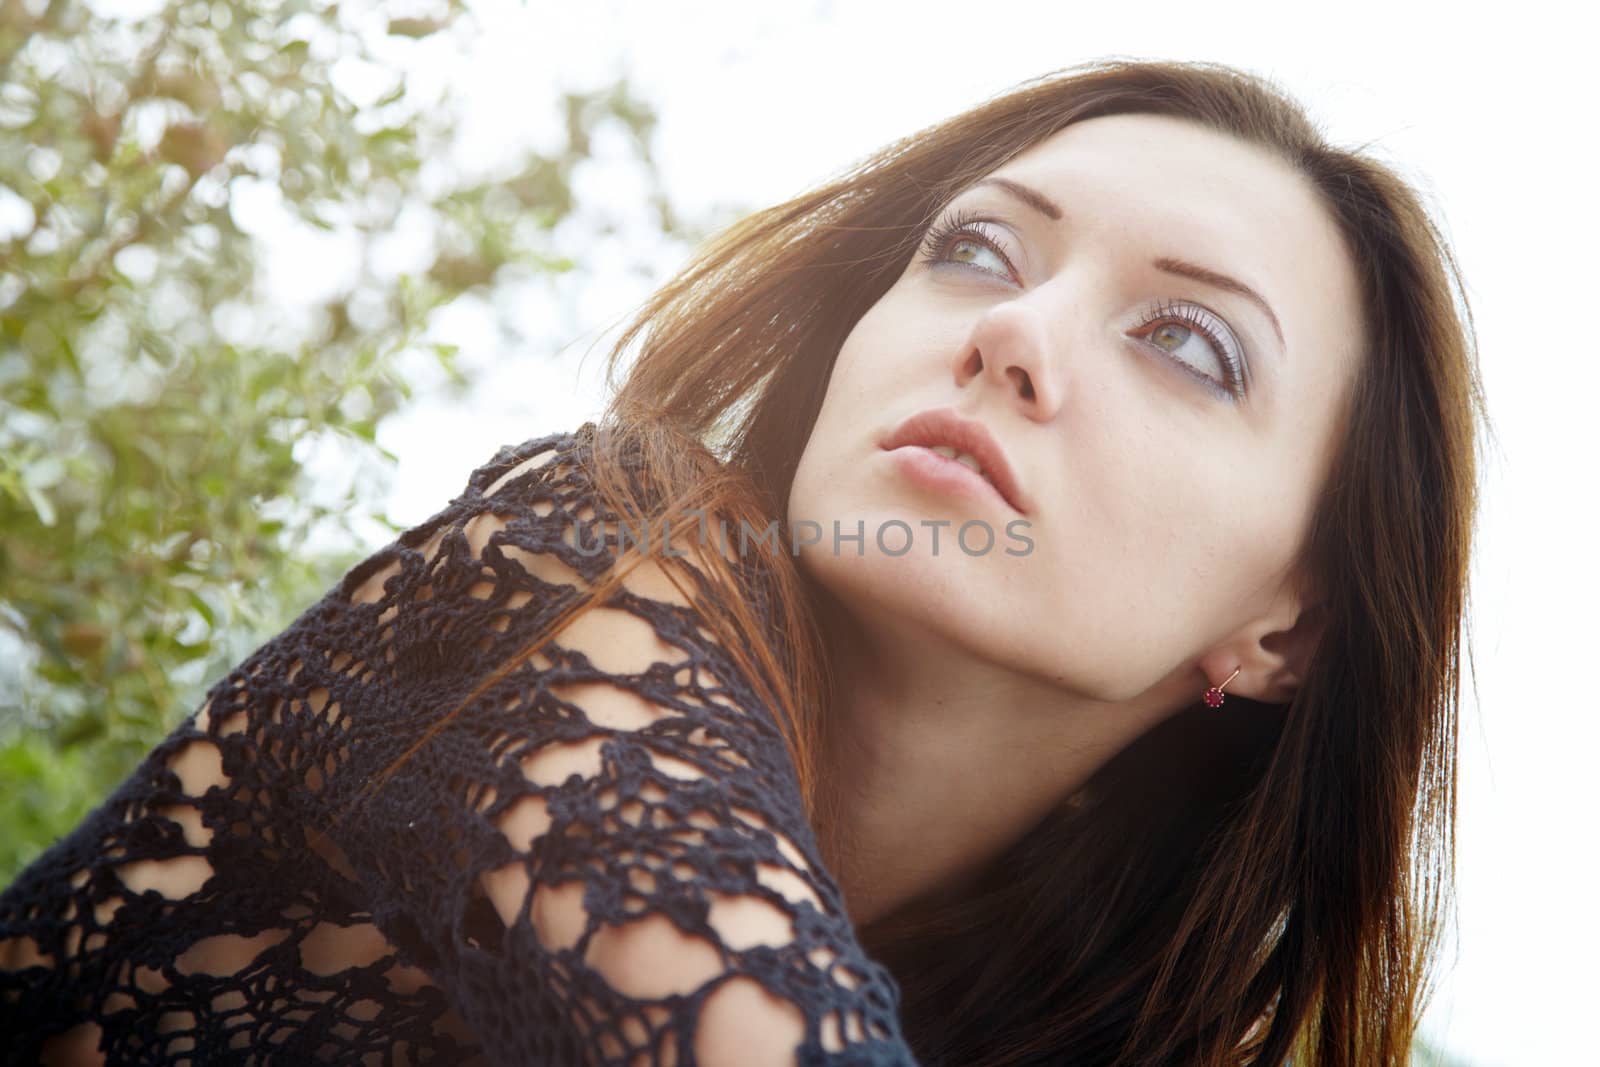 Horizontal portrait of the pretty young woman outdoors